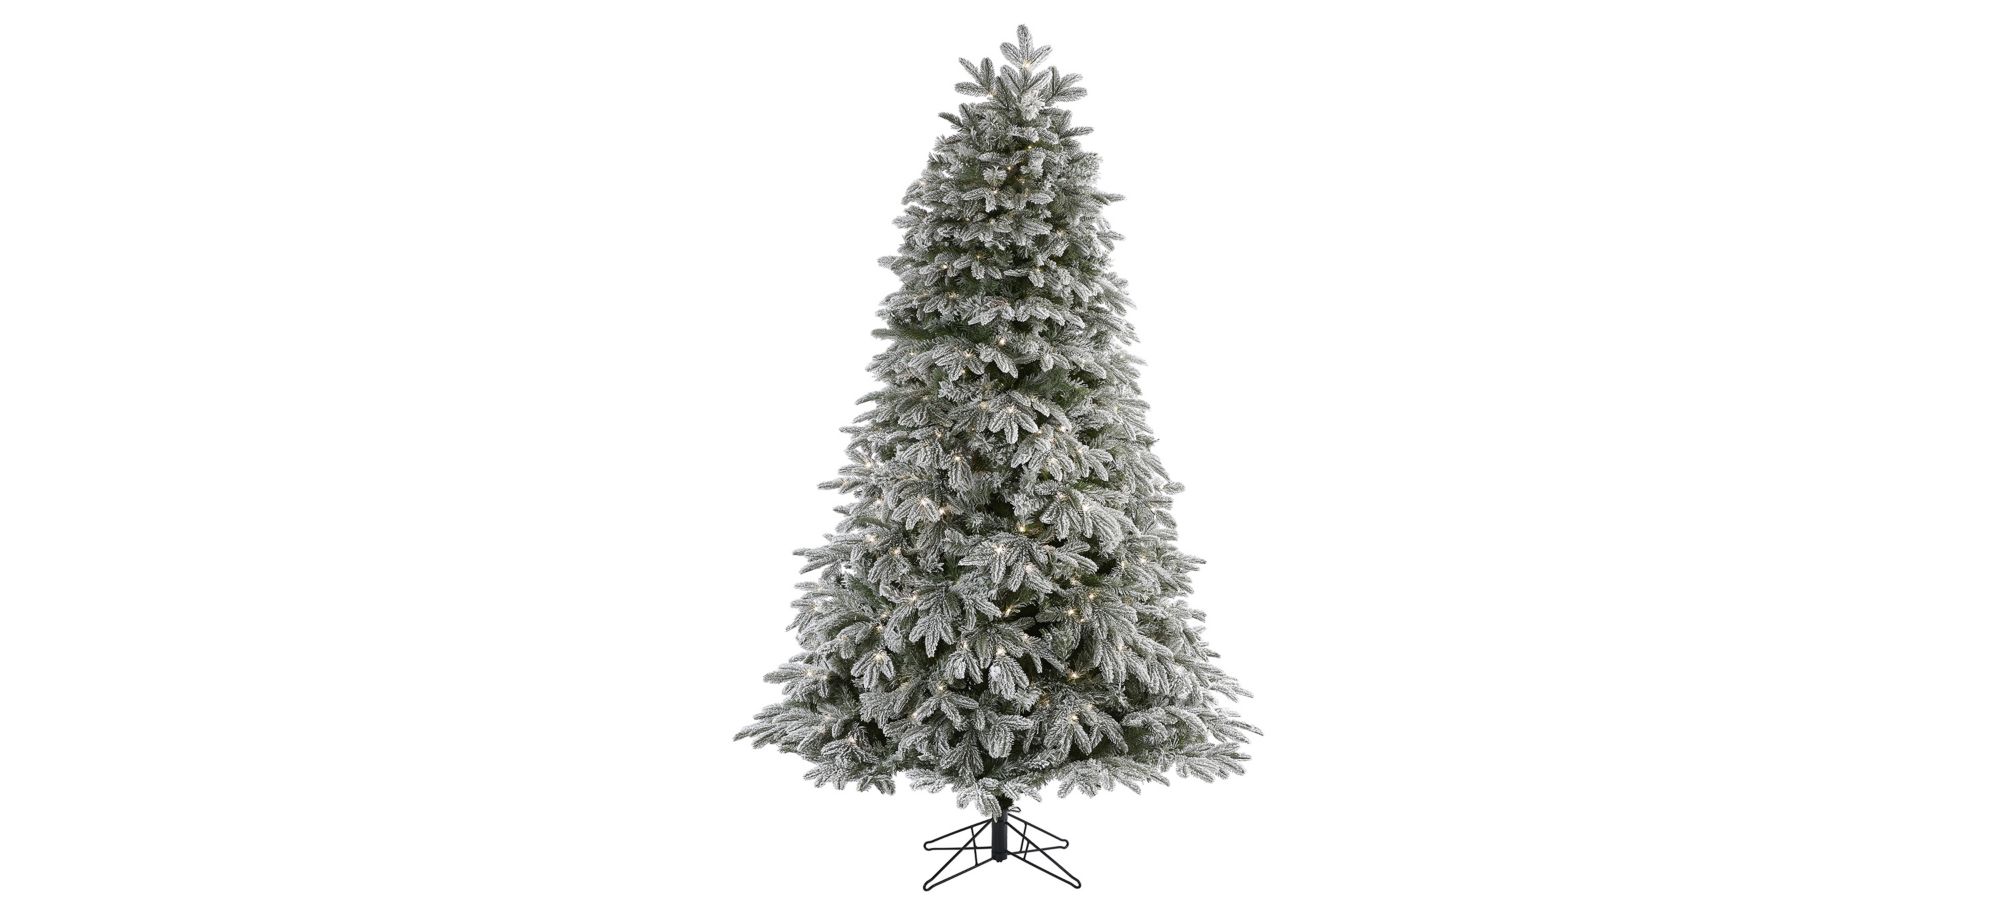 7ft. Pre-Lit Flocked Colorado Mountain Fir Artificial Christmas Tree in Green by Bellanest